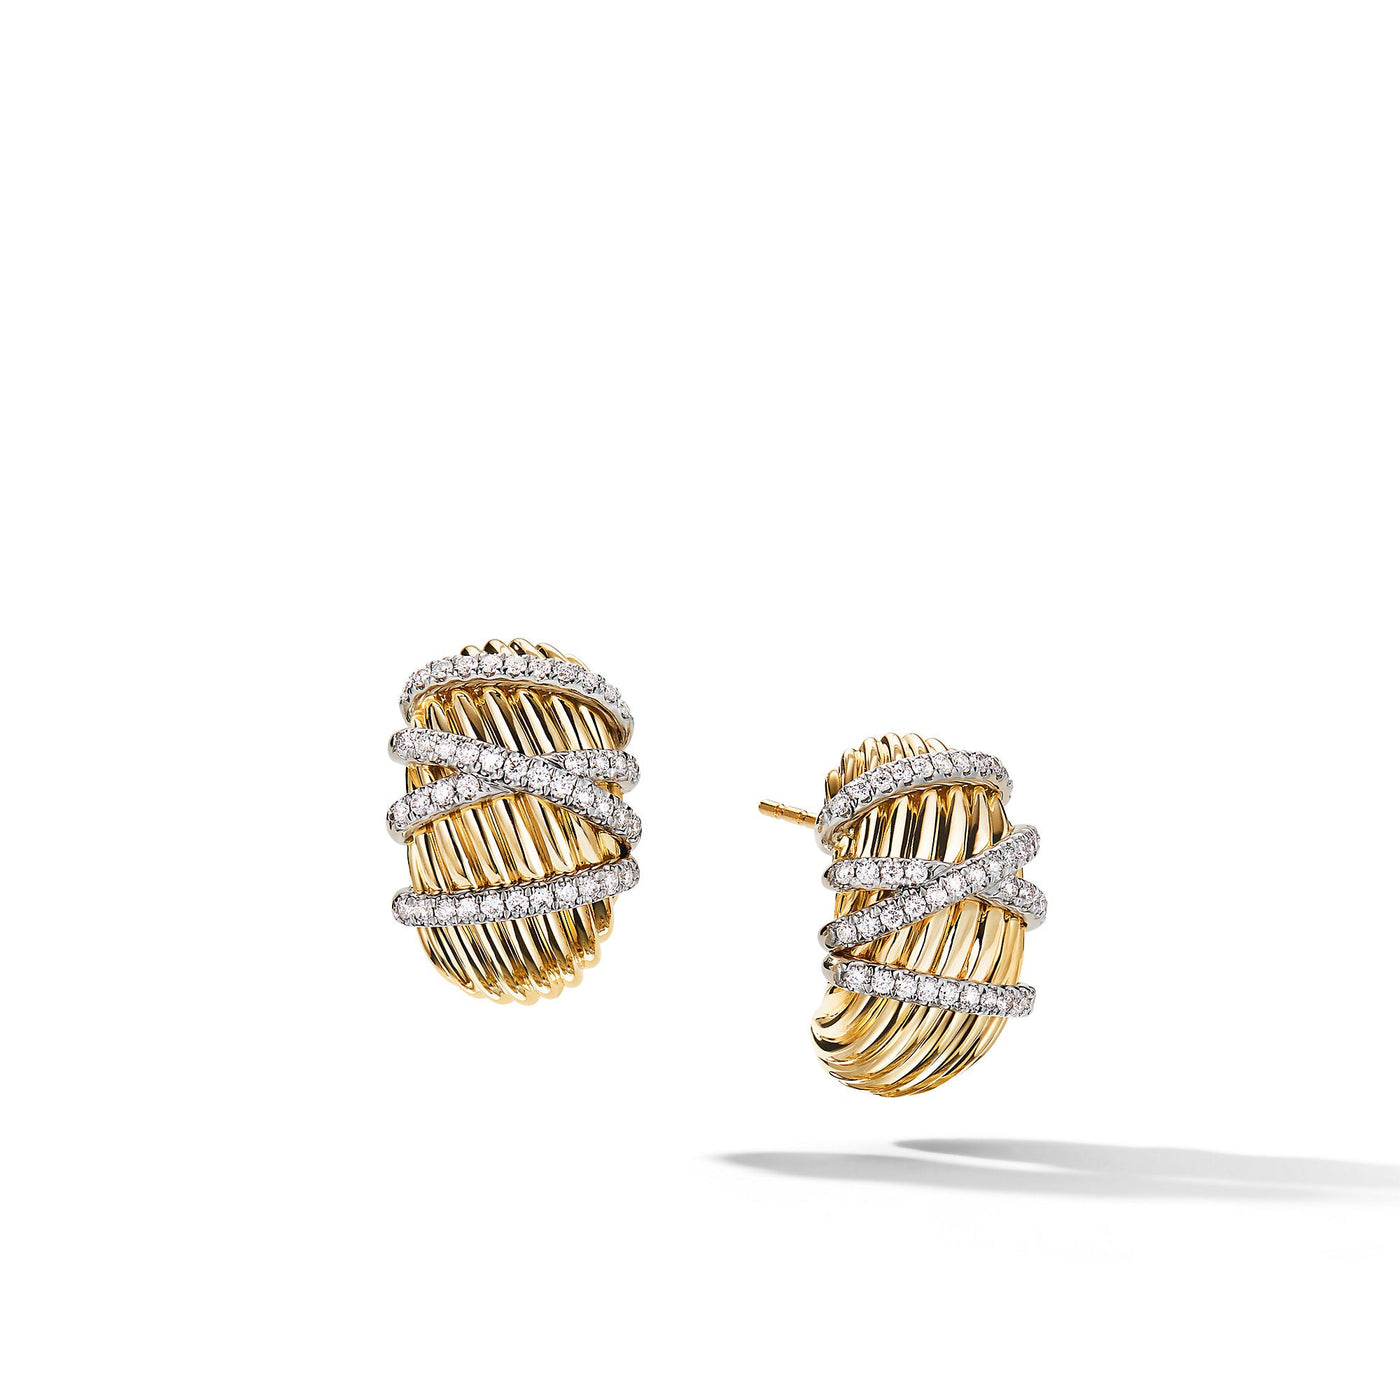 Helena Shrimp Earrings in 18K Yellow Gold with Diamonds\, 19.8mm